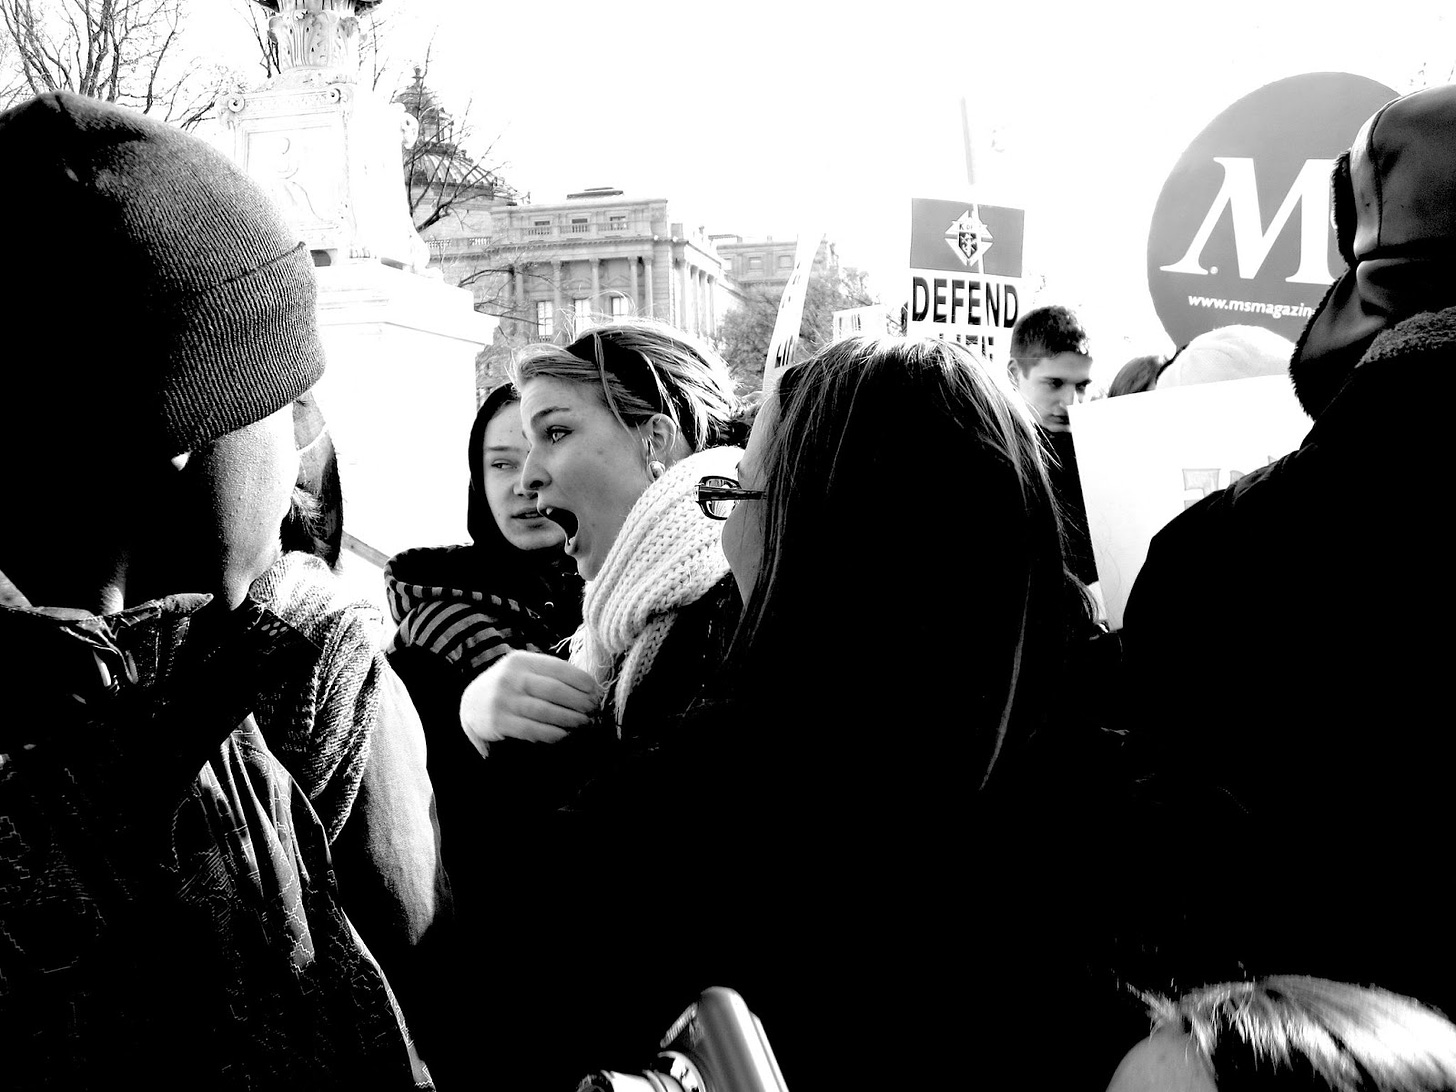 pro-choice woman argues with pro-life person